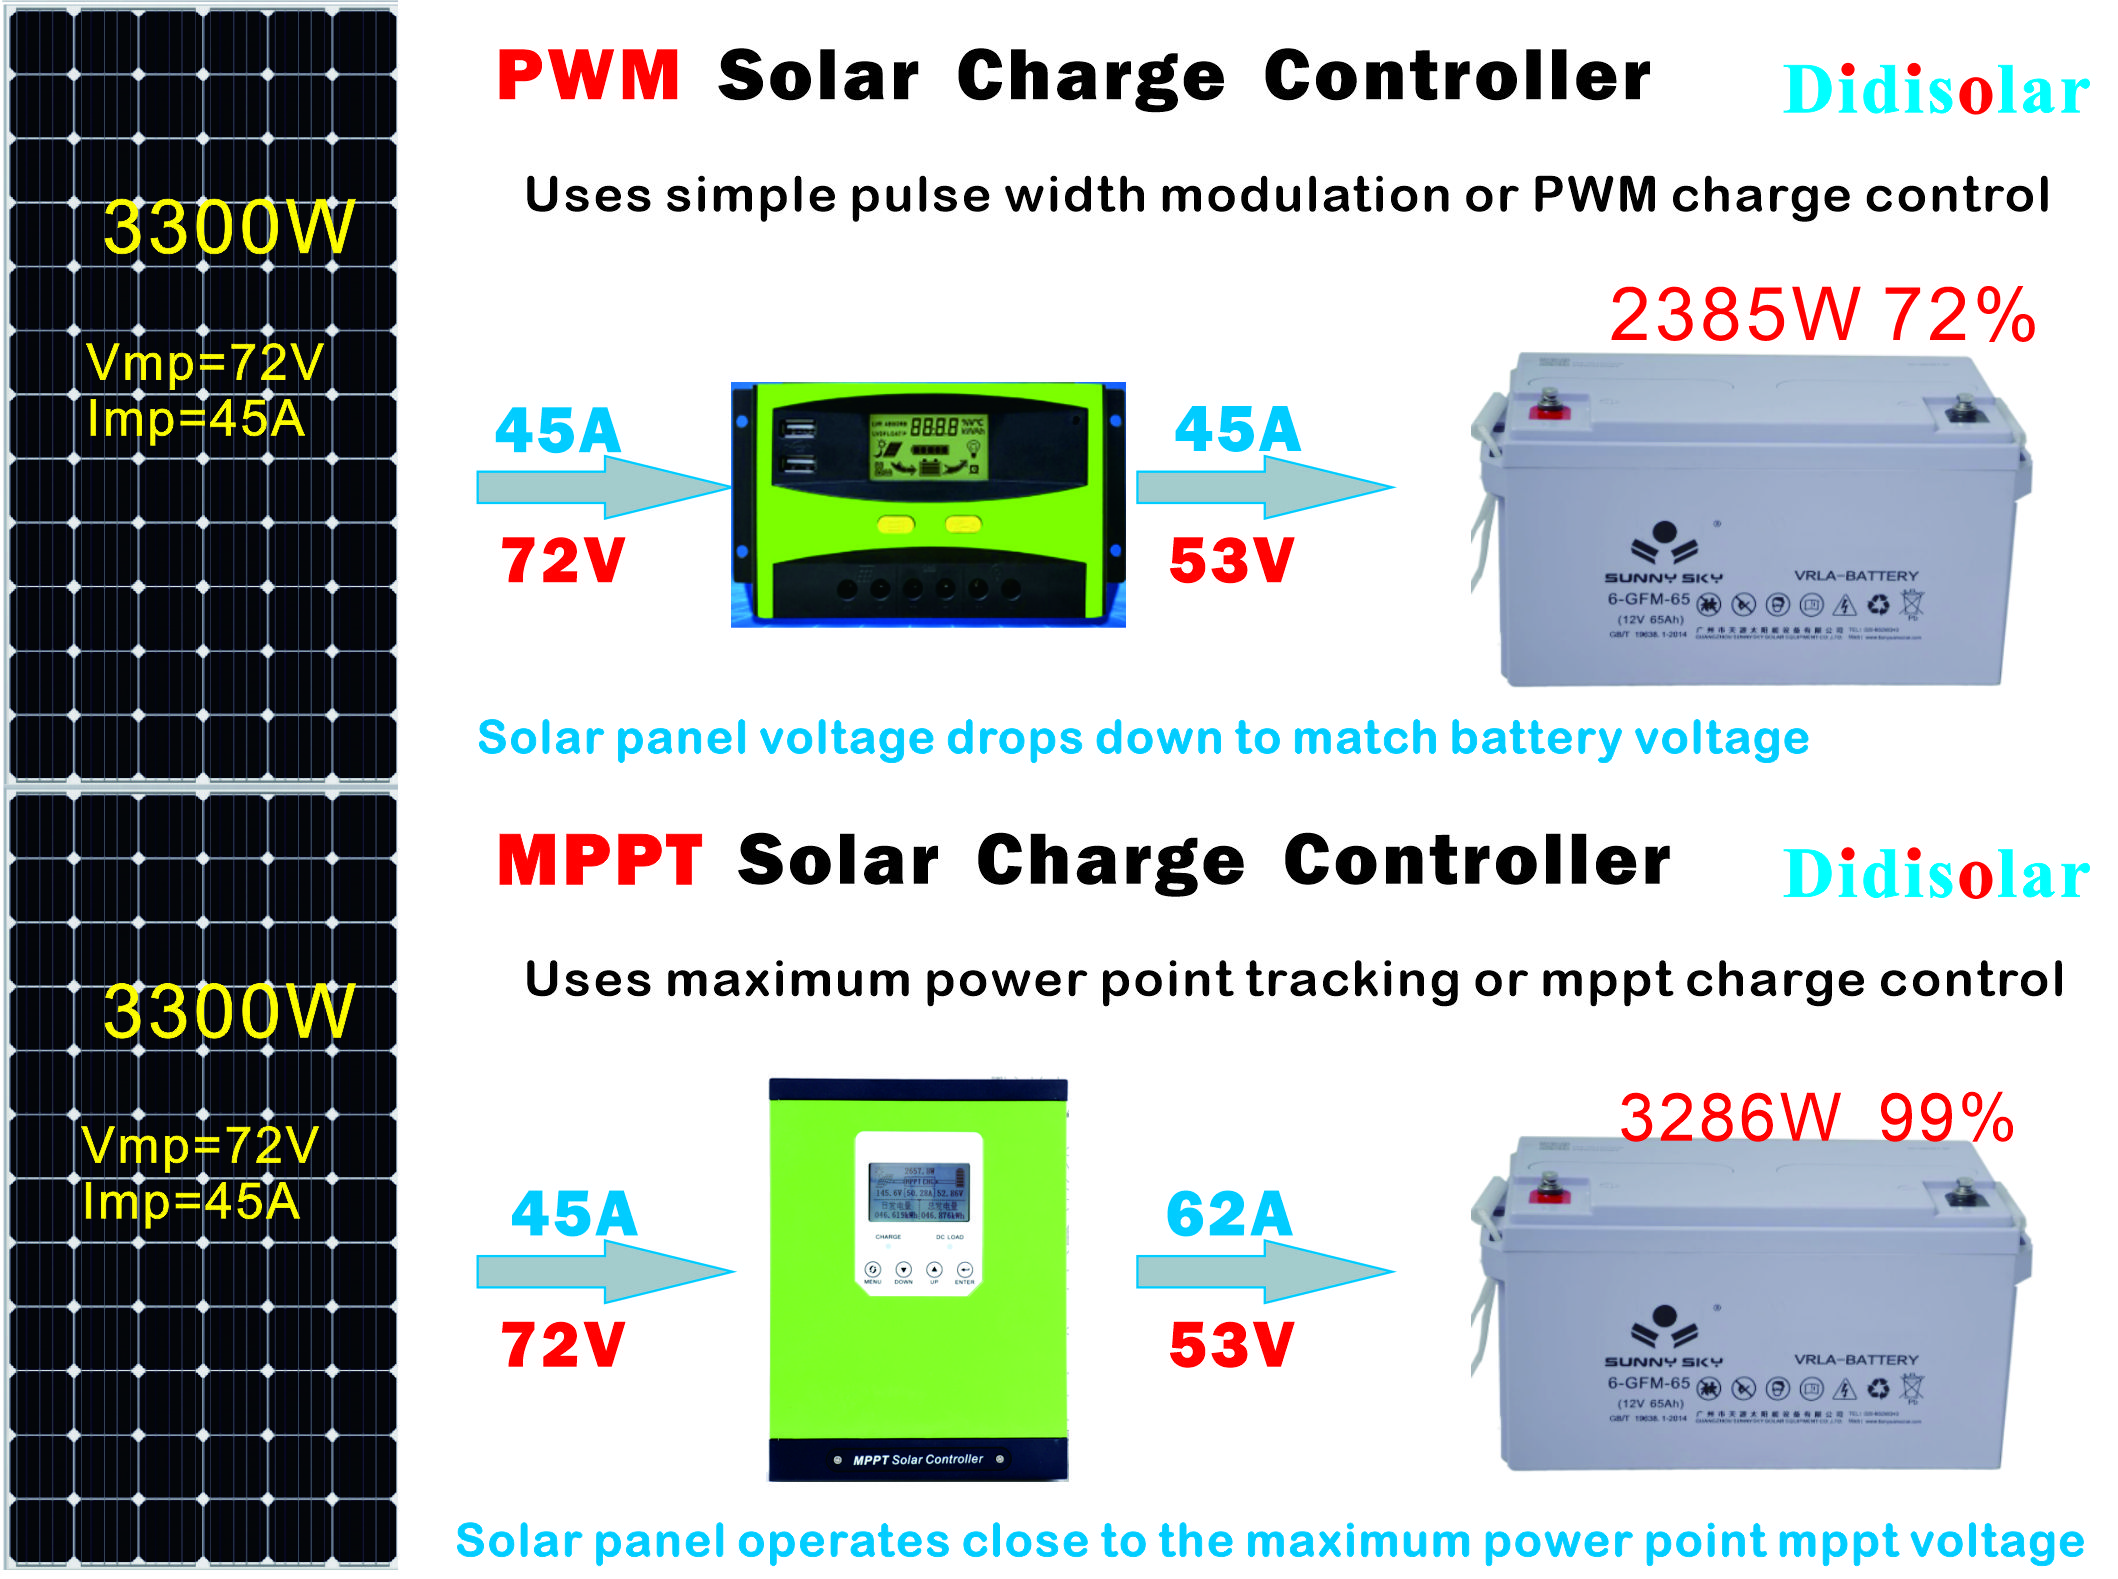 What is the different between MPPT controller and PWM controller